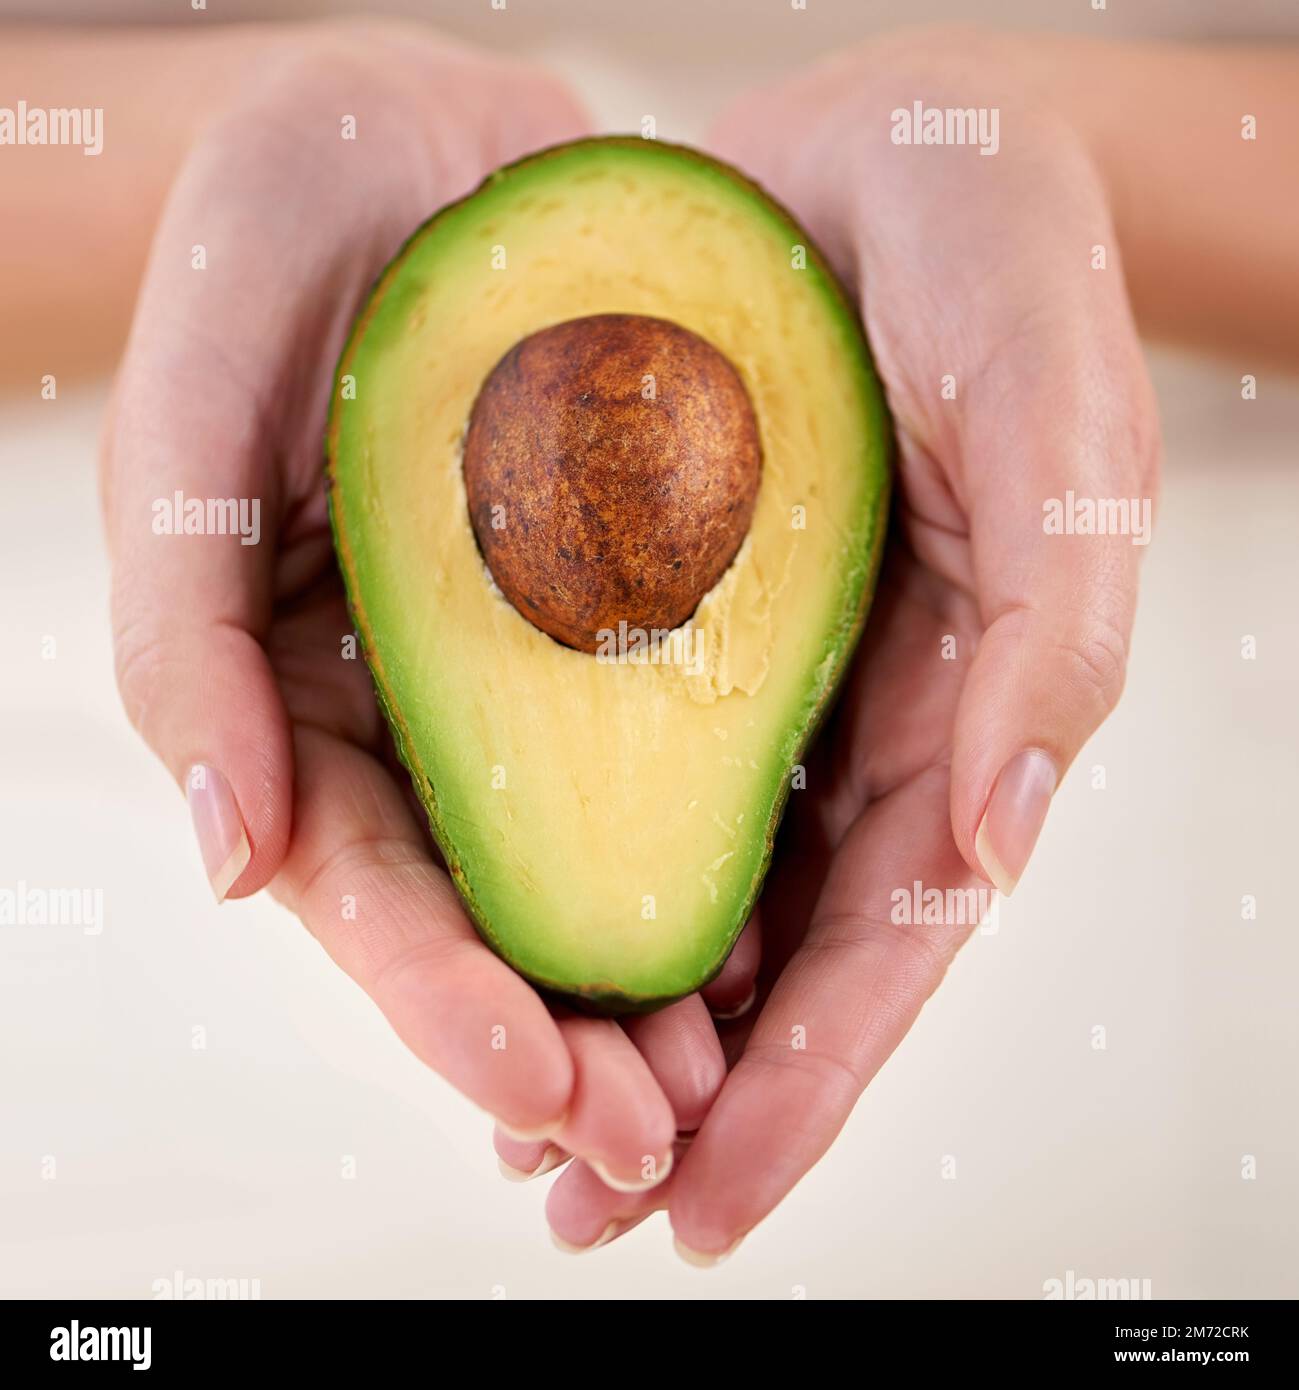 Good to eat and also great for your skin. a woman holding half an avocado in her cupped hands. Stock Photo